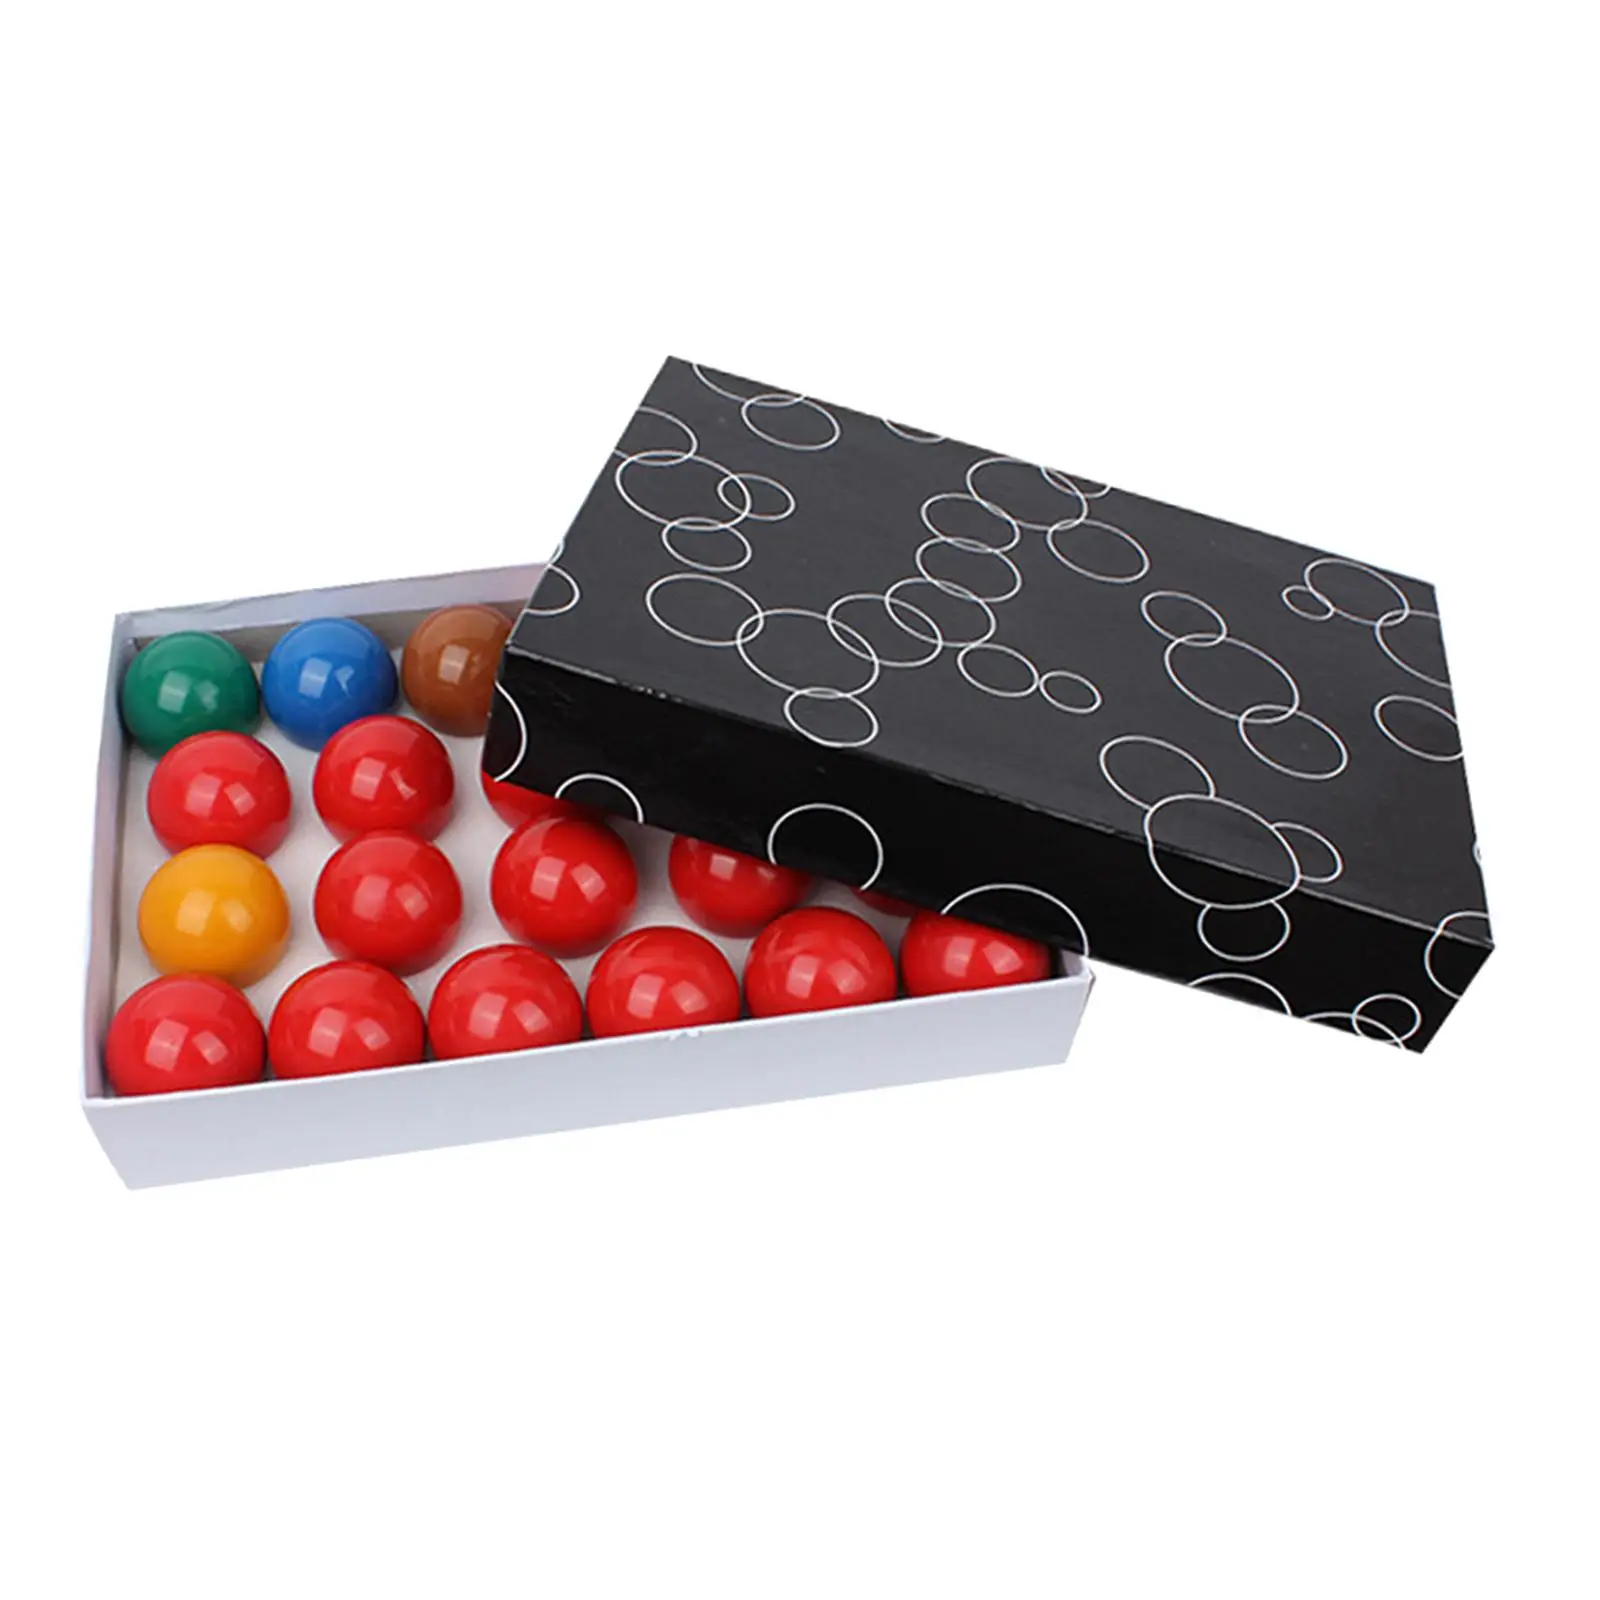 22Pieces Snooker Ball Set, Pool Table Balls, Resin Colorful Billiard Balls for Leisure Sports Snooker & Billiard Accessories